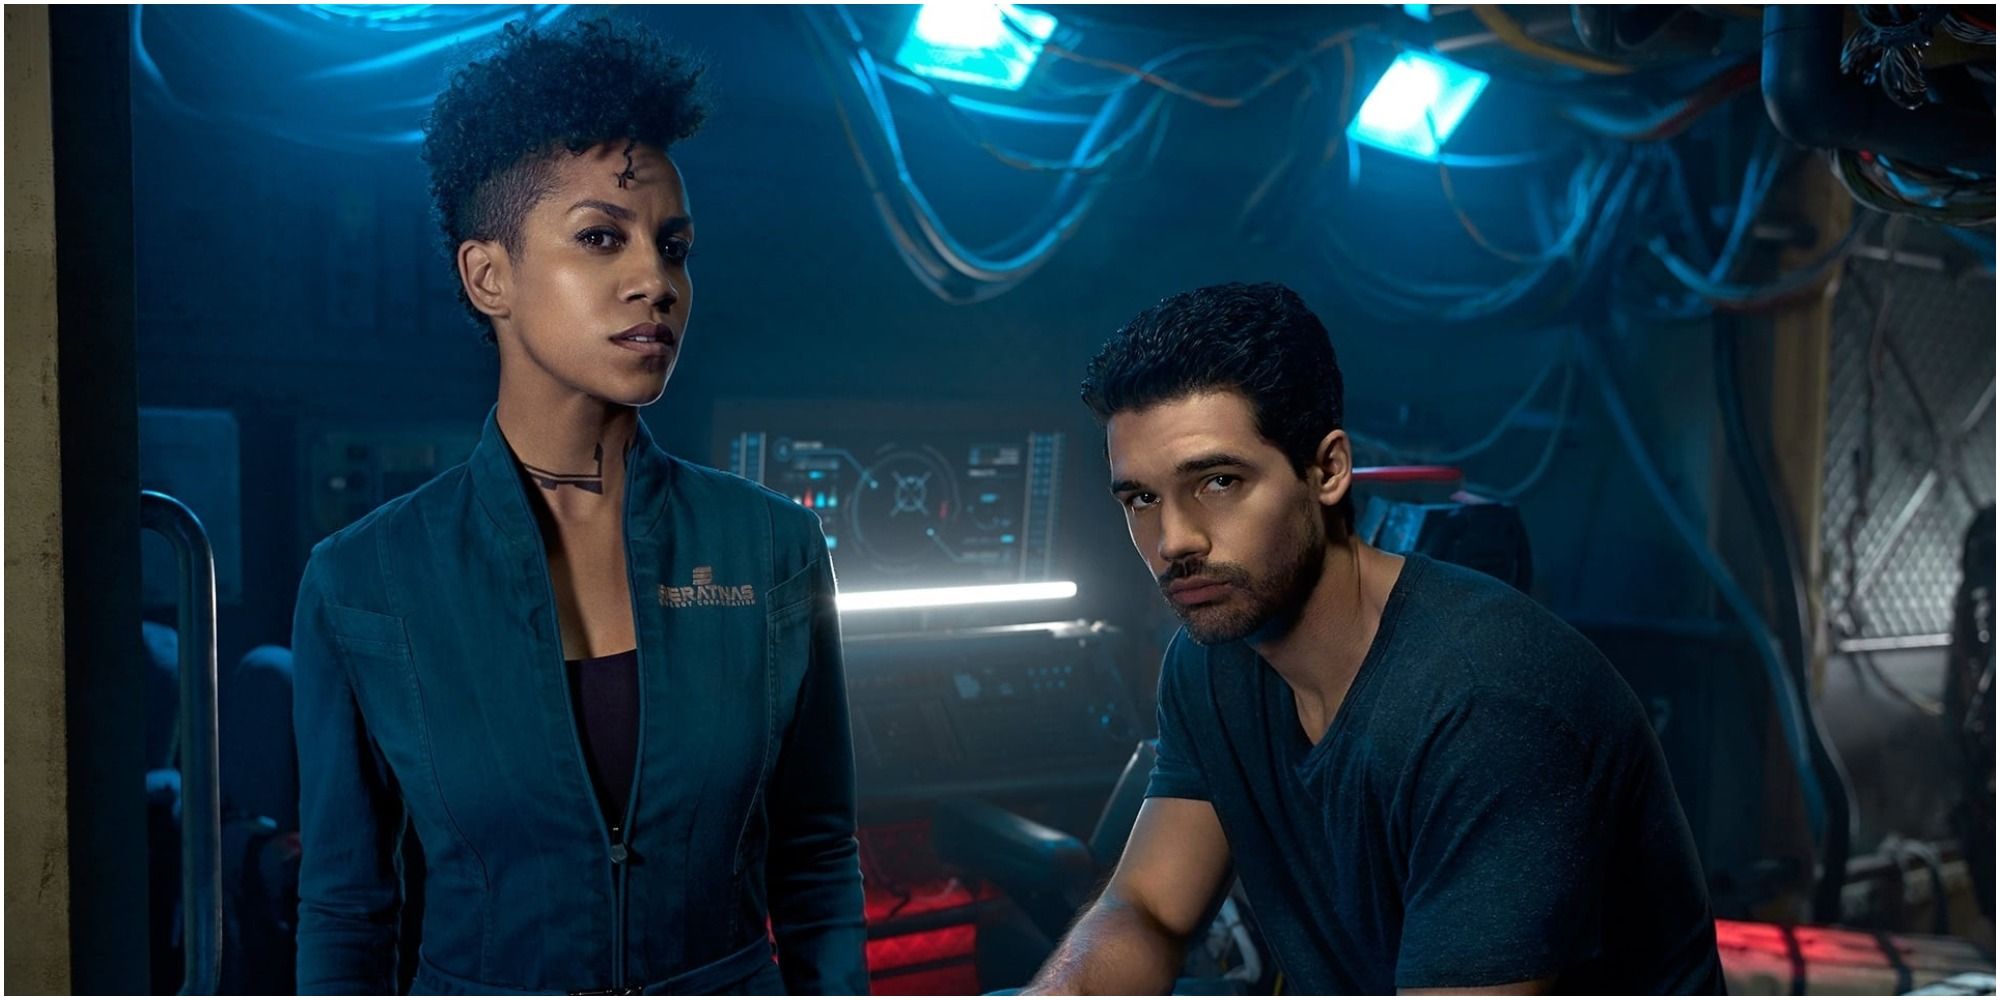 The Best Shows On Amazon Prime For Those Who Love SciFi